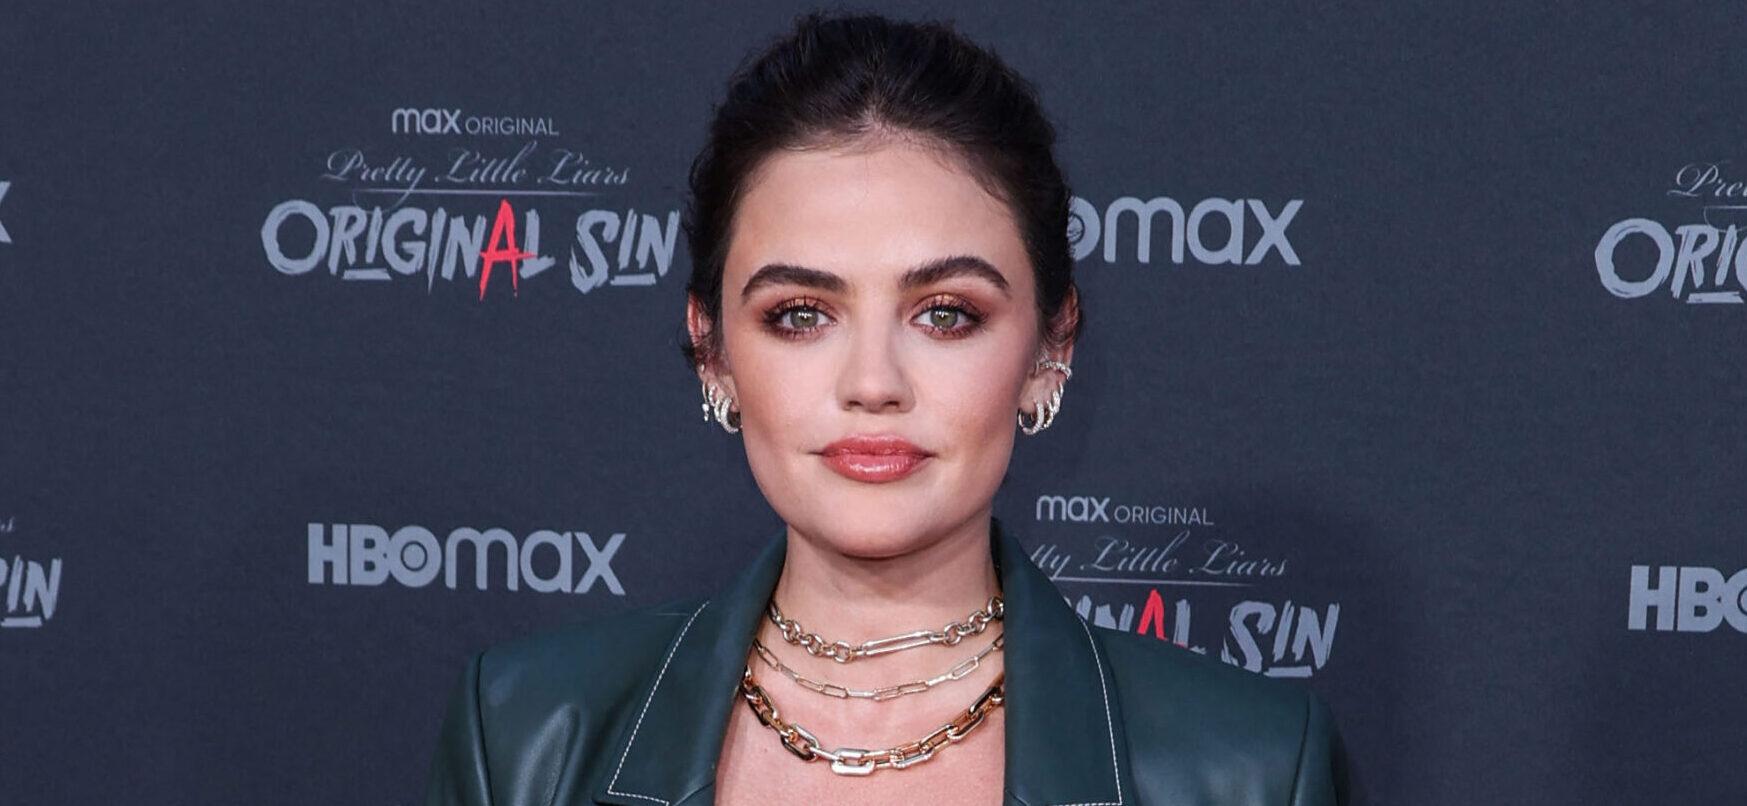 Lucy Hale Reveals REAL Relationship With Her ‘Pretty Little Liars’ Co-Stars